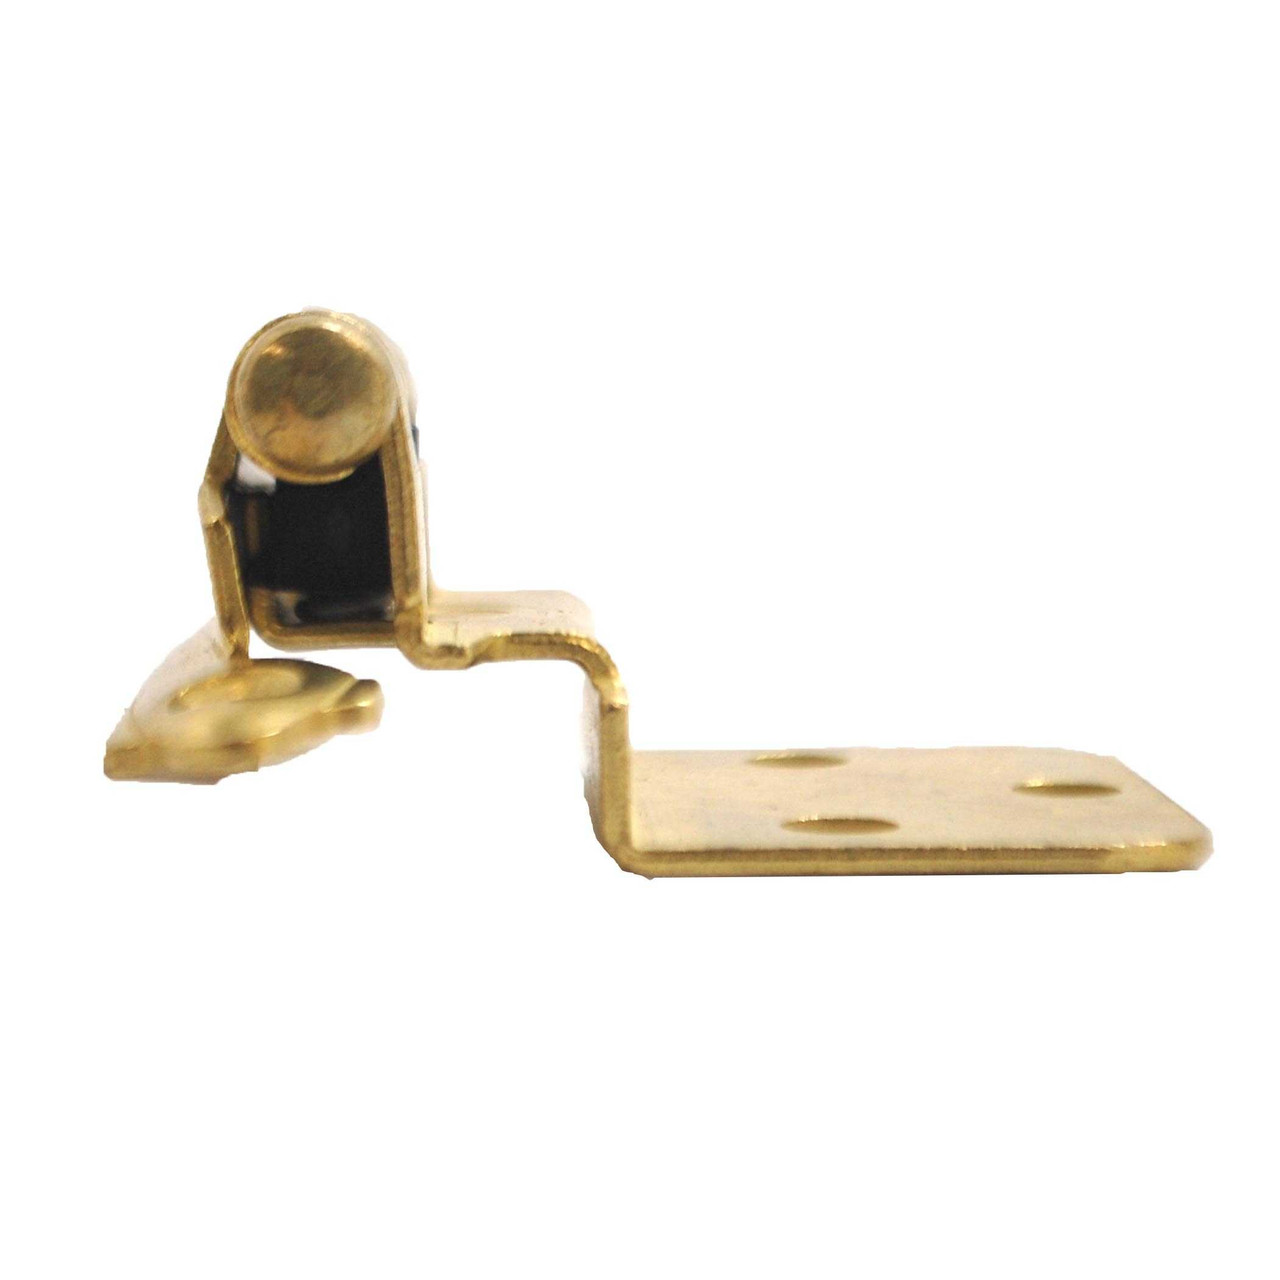 https://cdn11.bigcommerce.com/s-1xpphv/images/stencil/1280x1280/products/832/14449/AMEROCK-Self-Closing-Face-Mount-38-Inset-Cabinet-Hinges-Polished-Brass-CM7128-3-pair_5916__76459.1674494616.JPG?c=2